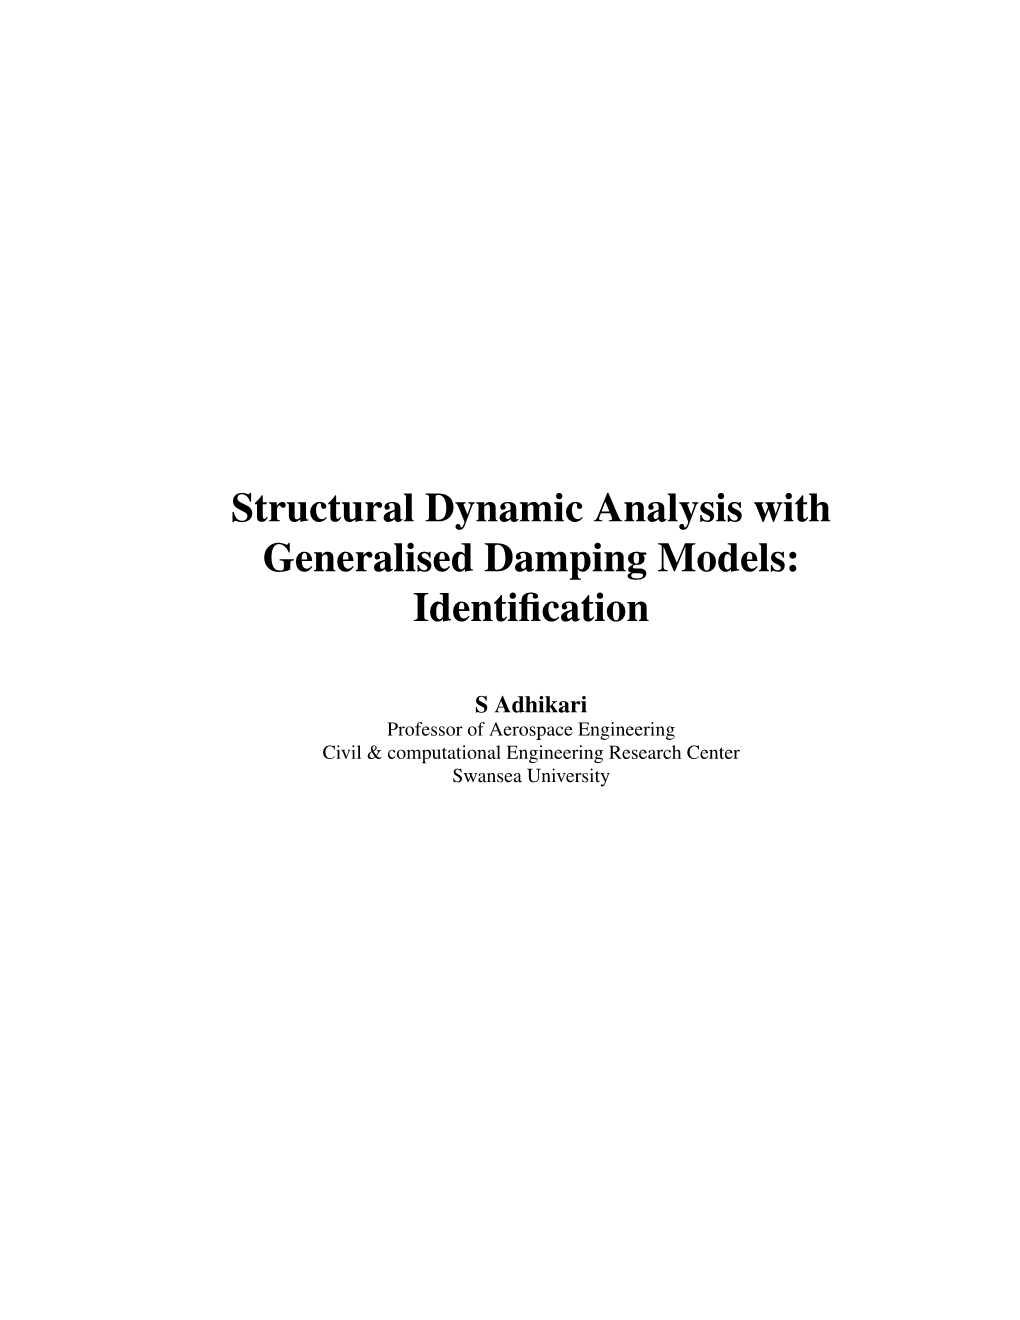 Structural Dynamic Analysis with Generalised Damping Models: Identiﬁcation